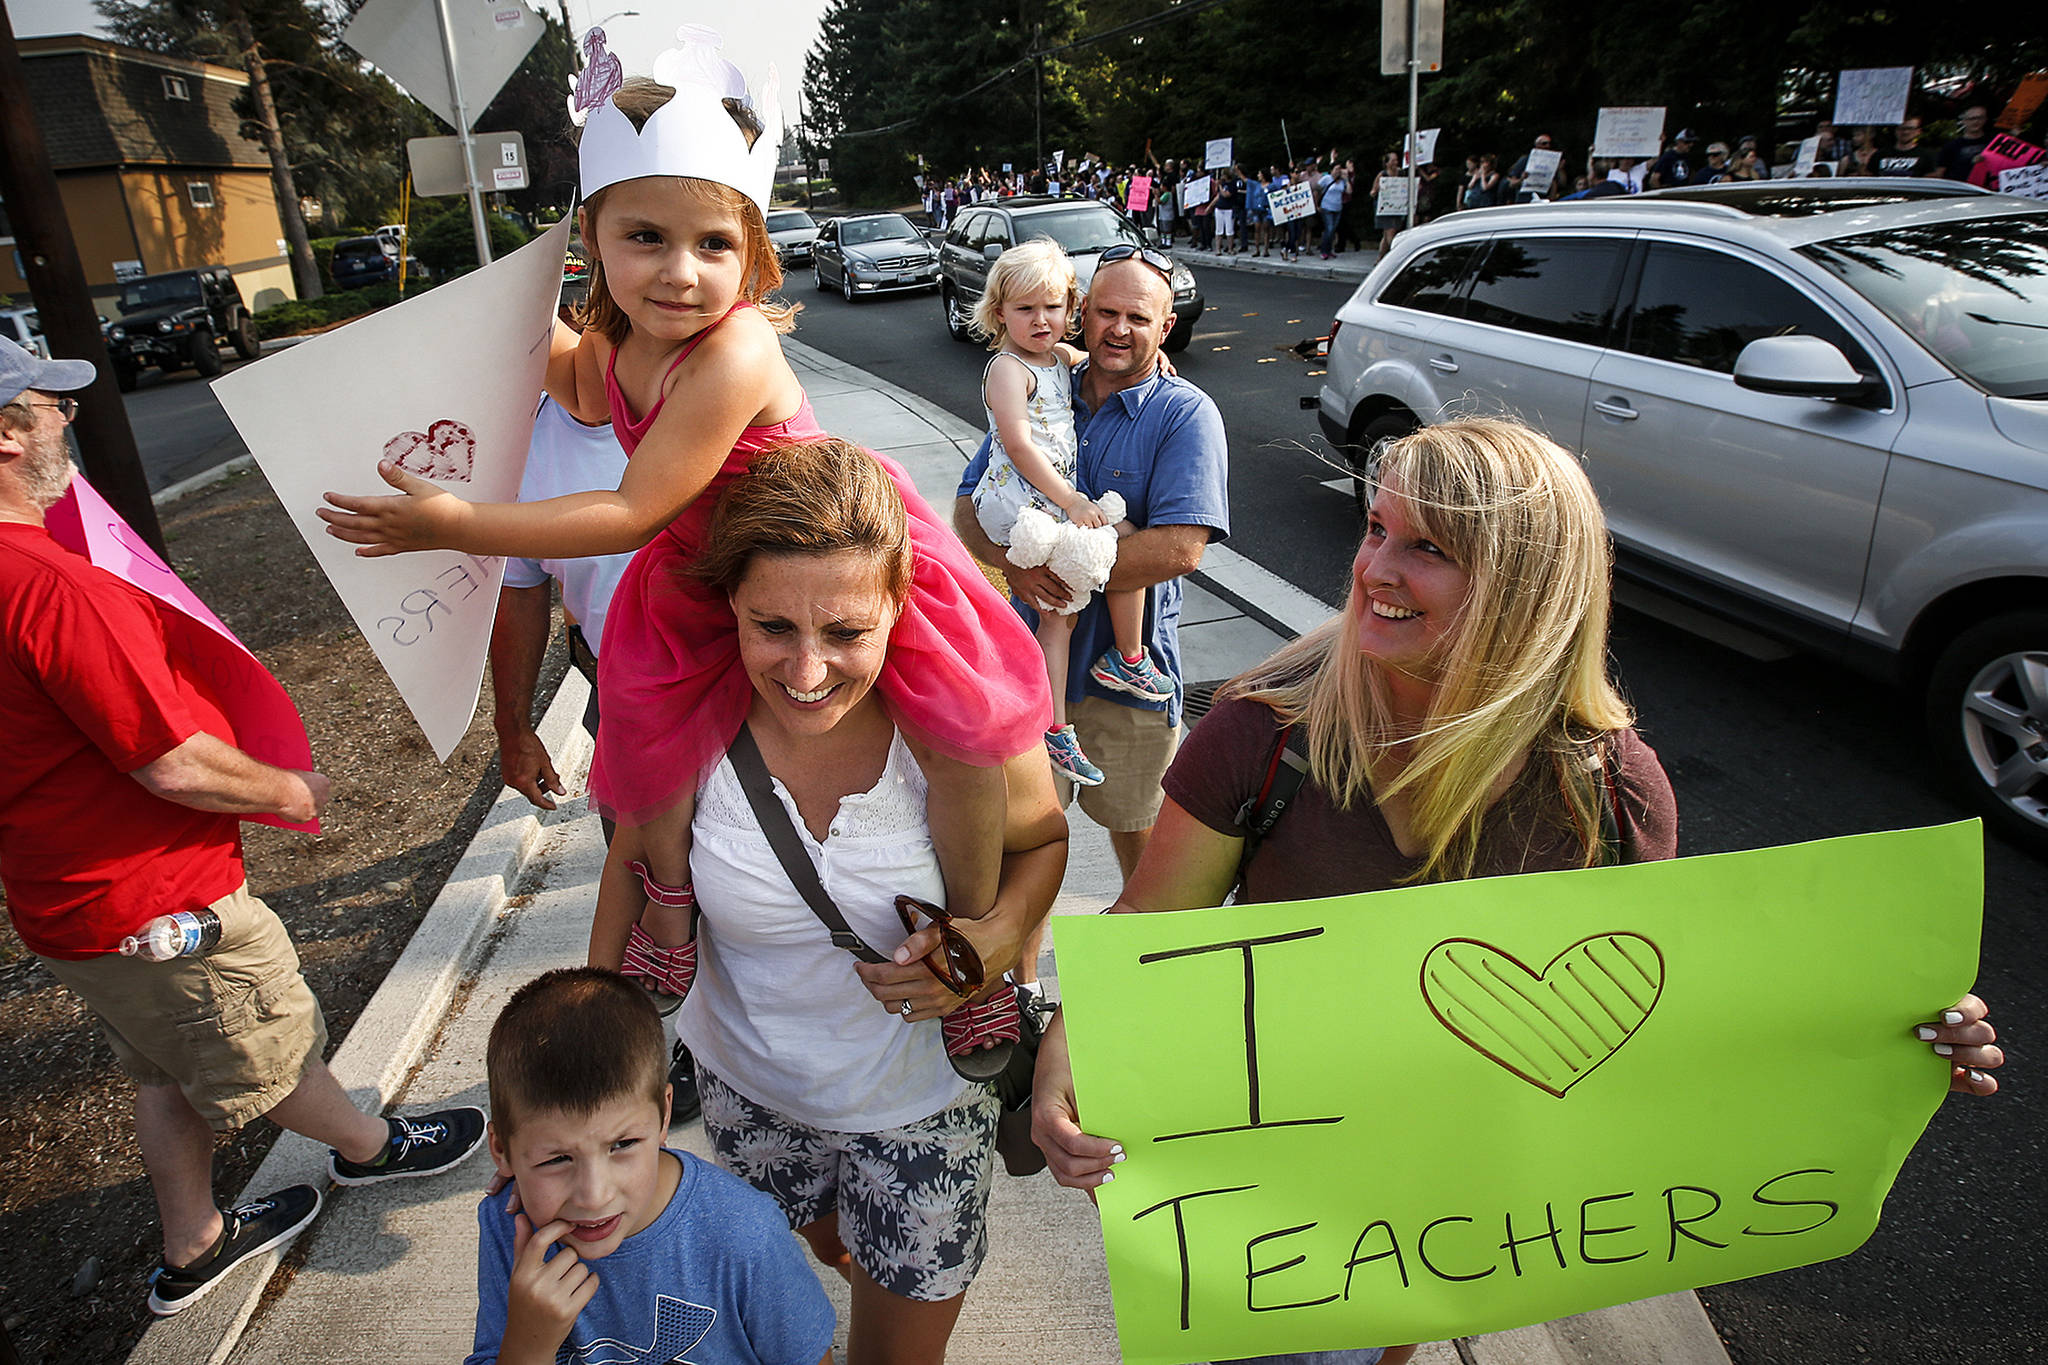 Talia, 4, rides on the shoulders of her mother Nicki Berger, a teacher at Terrace Park School in Mountlake Terrace, during a rally outside Edmonds School District offices Tuesday evening to highlight ongoing struggles with contract negotiations. (Ian Terry / The Herald)